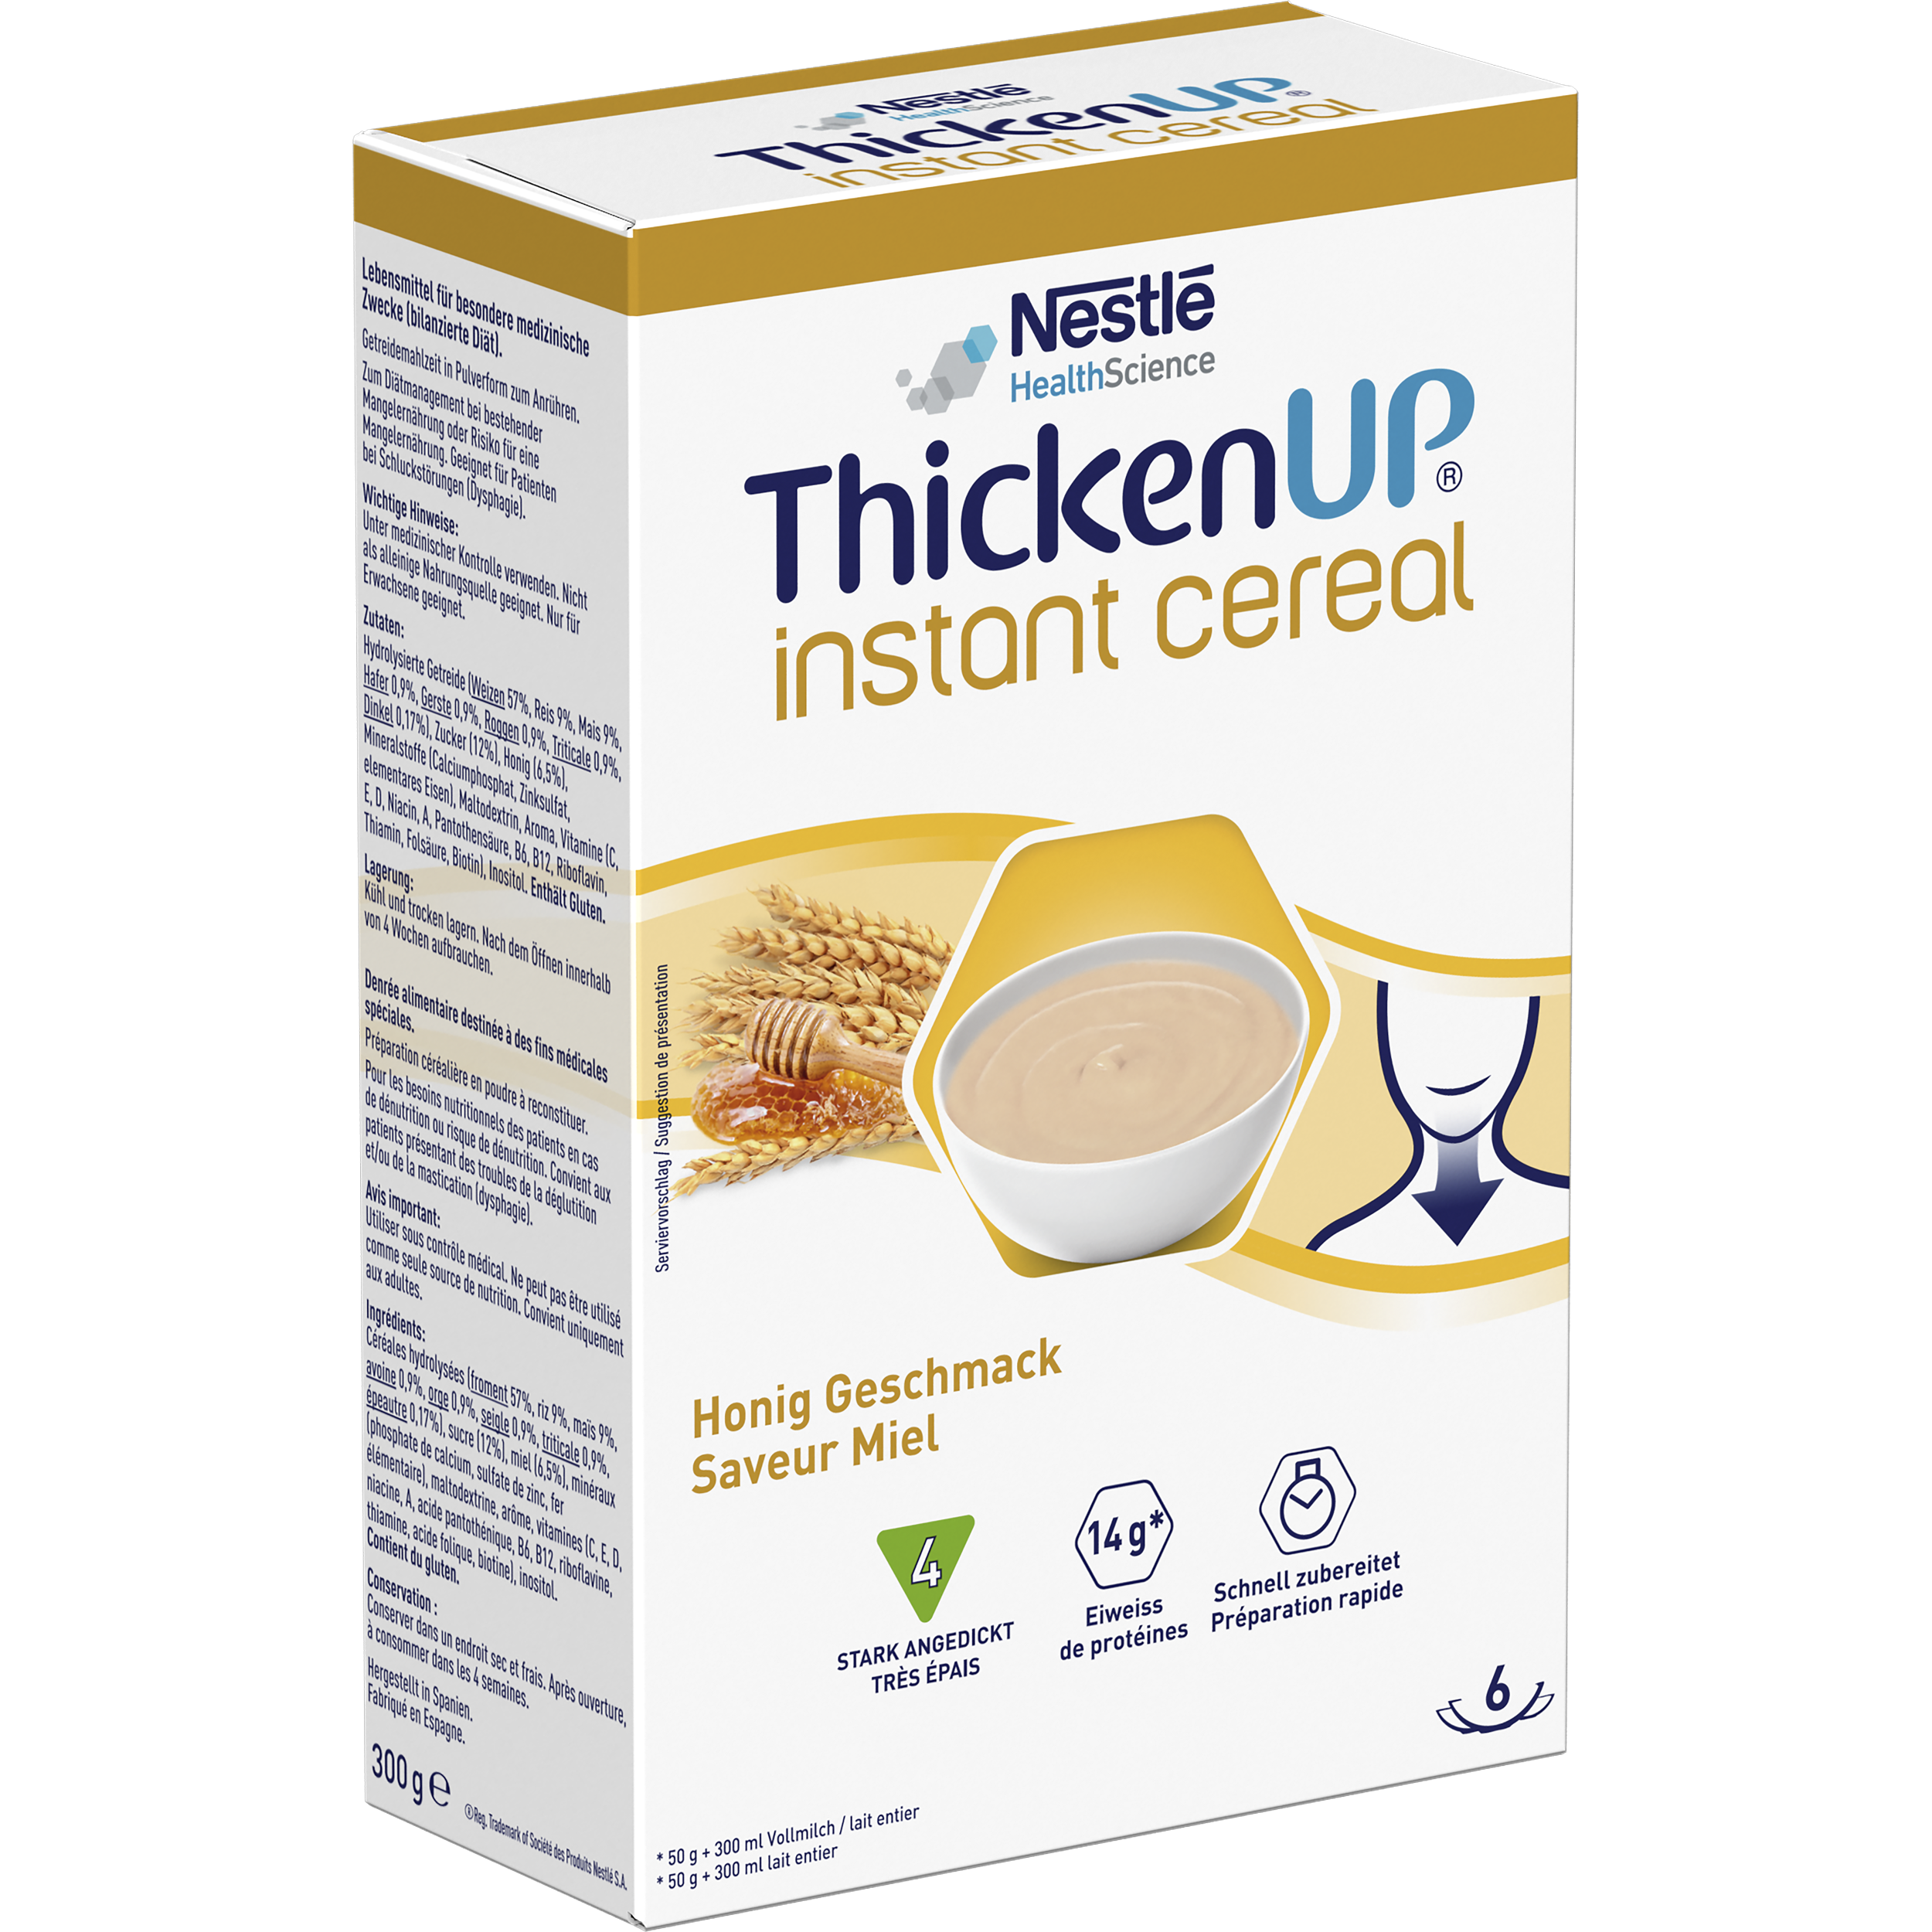 ThickenUP® instant cereal